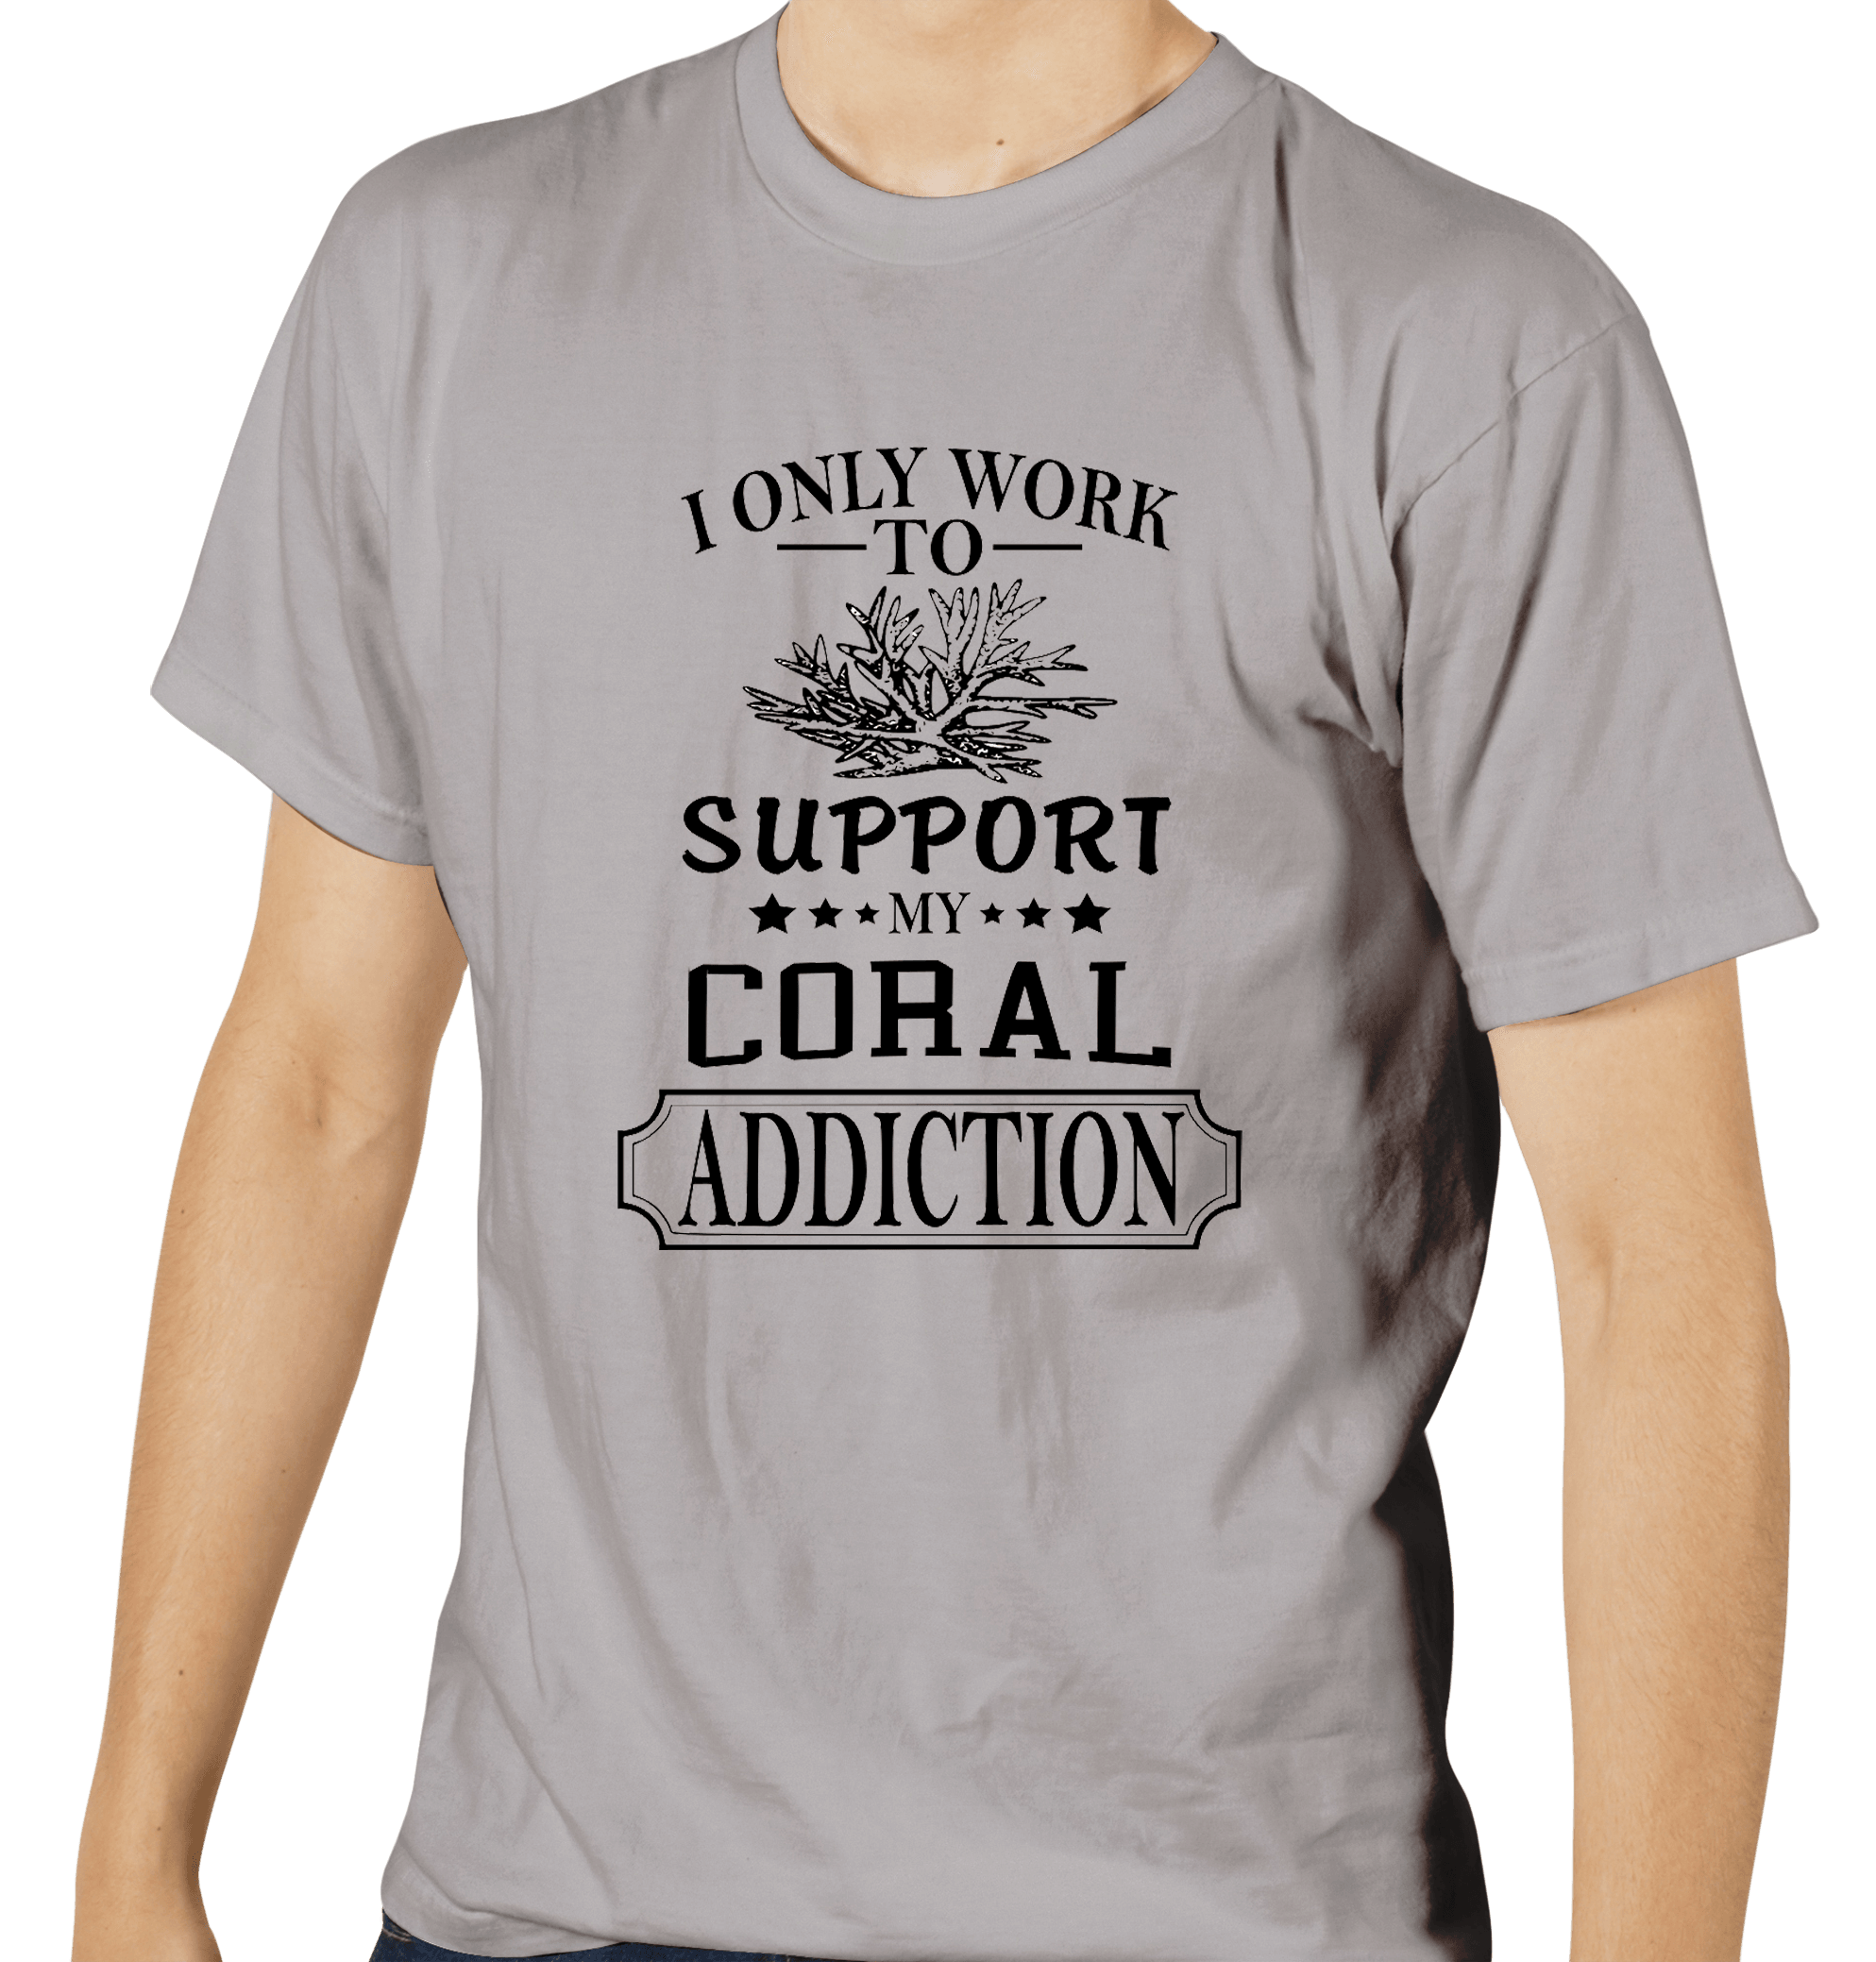 Coral Addiction T-Shirt Grey - SaltCritters